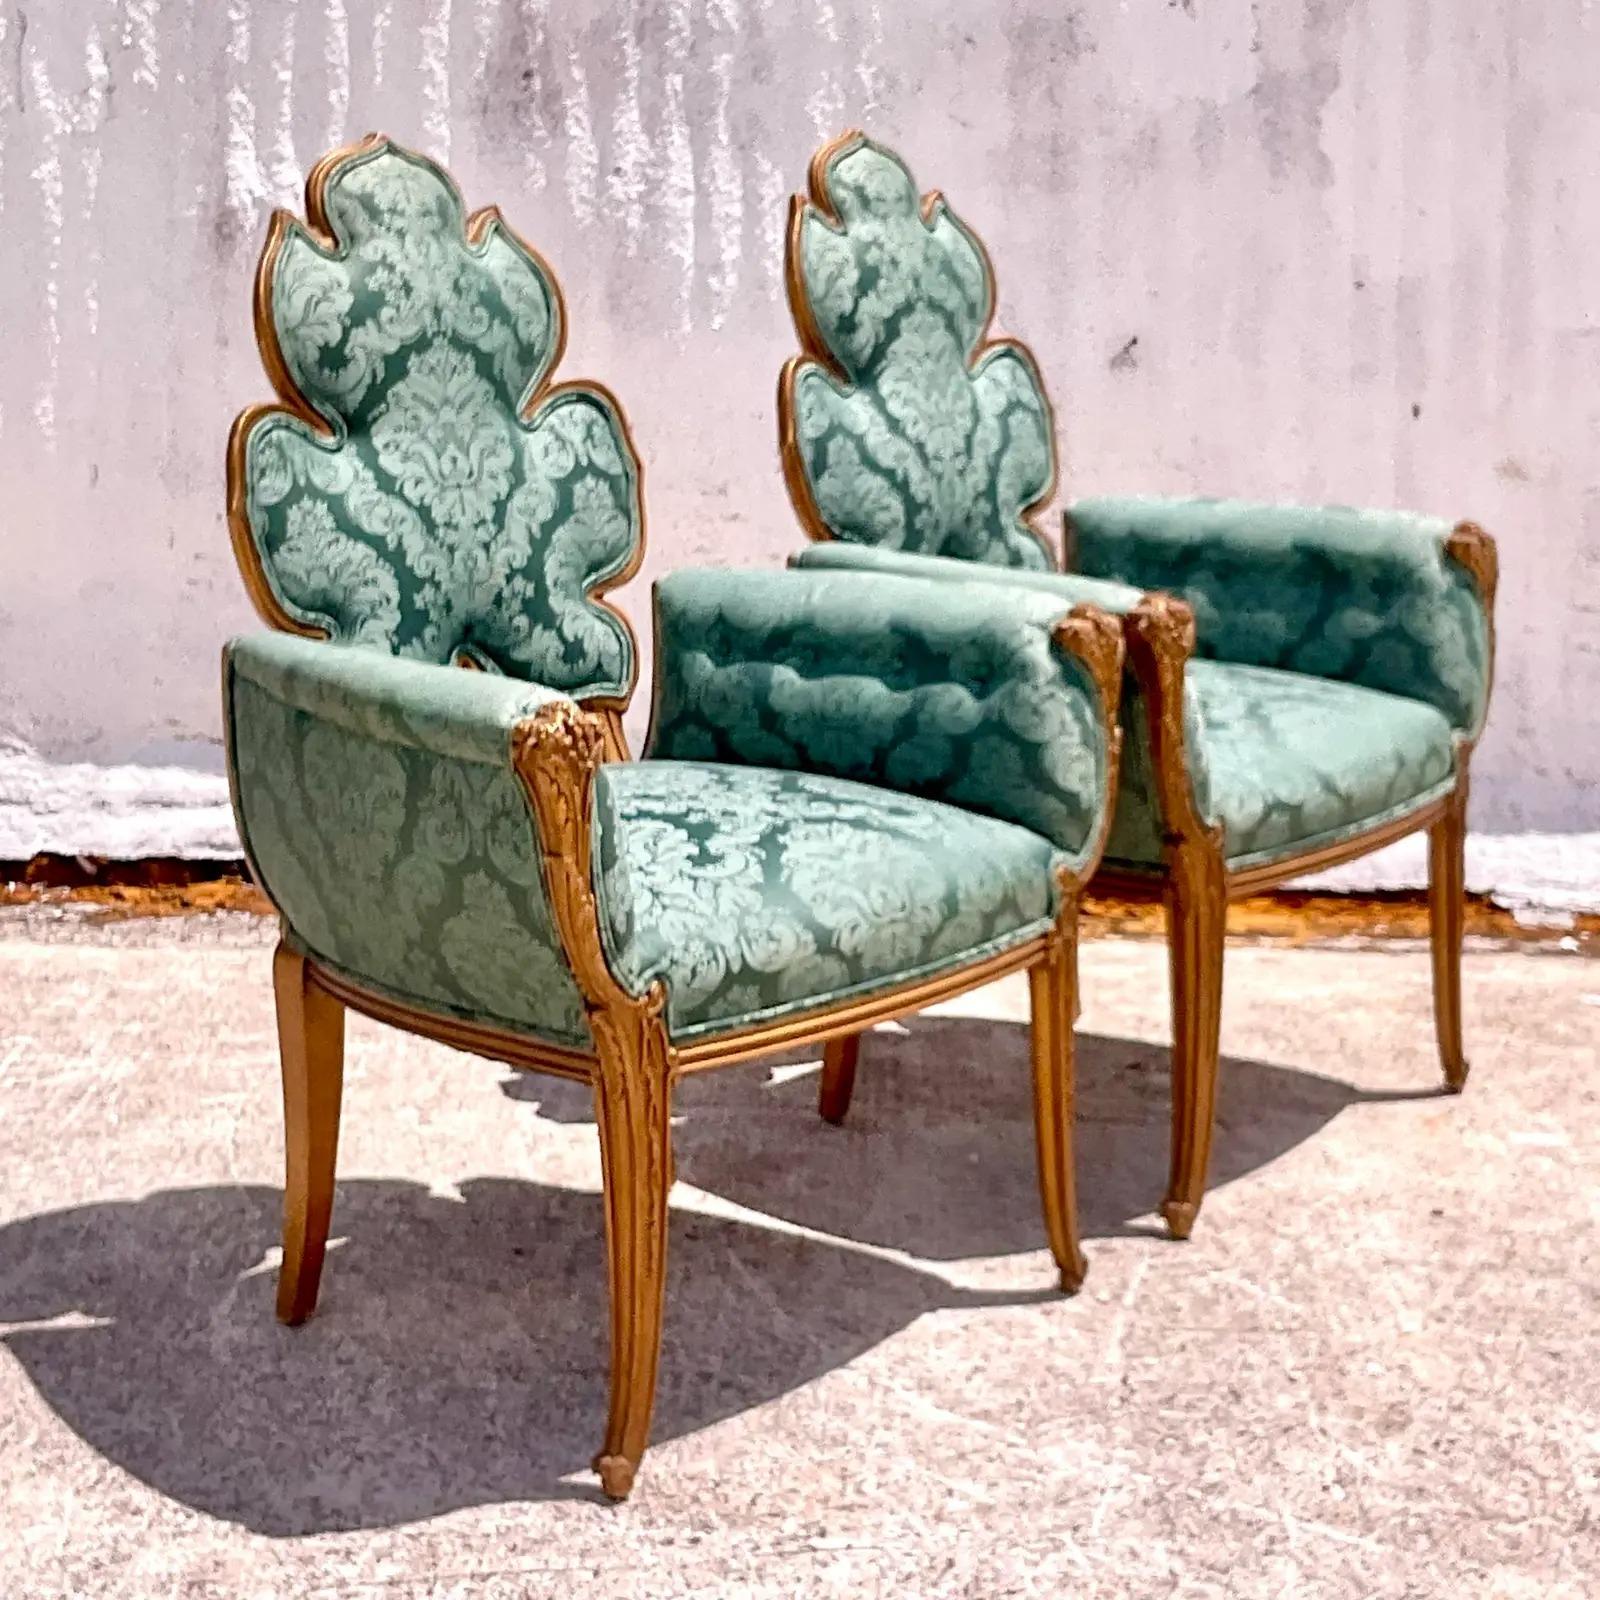 A spectacular pair of vintage Hand carved arm chairs. Made by the iconic Grosfeld House. Beautiful and rare leaf back shape. Covered in an Emerald green jacquard. Acquired from a Palm Beach estate.

The chairs are in great vintage condition. Minor